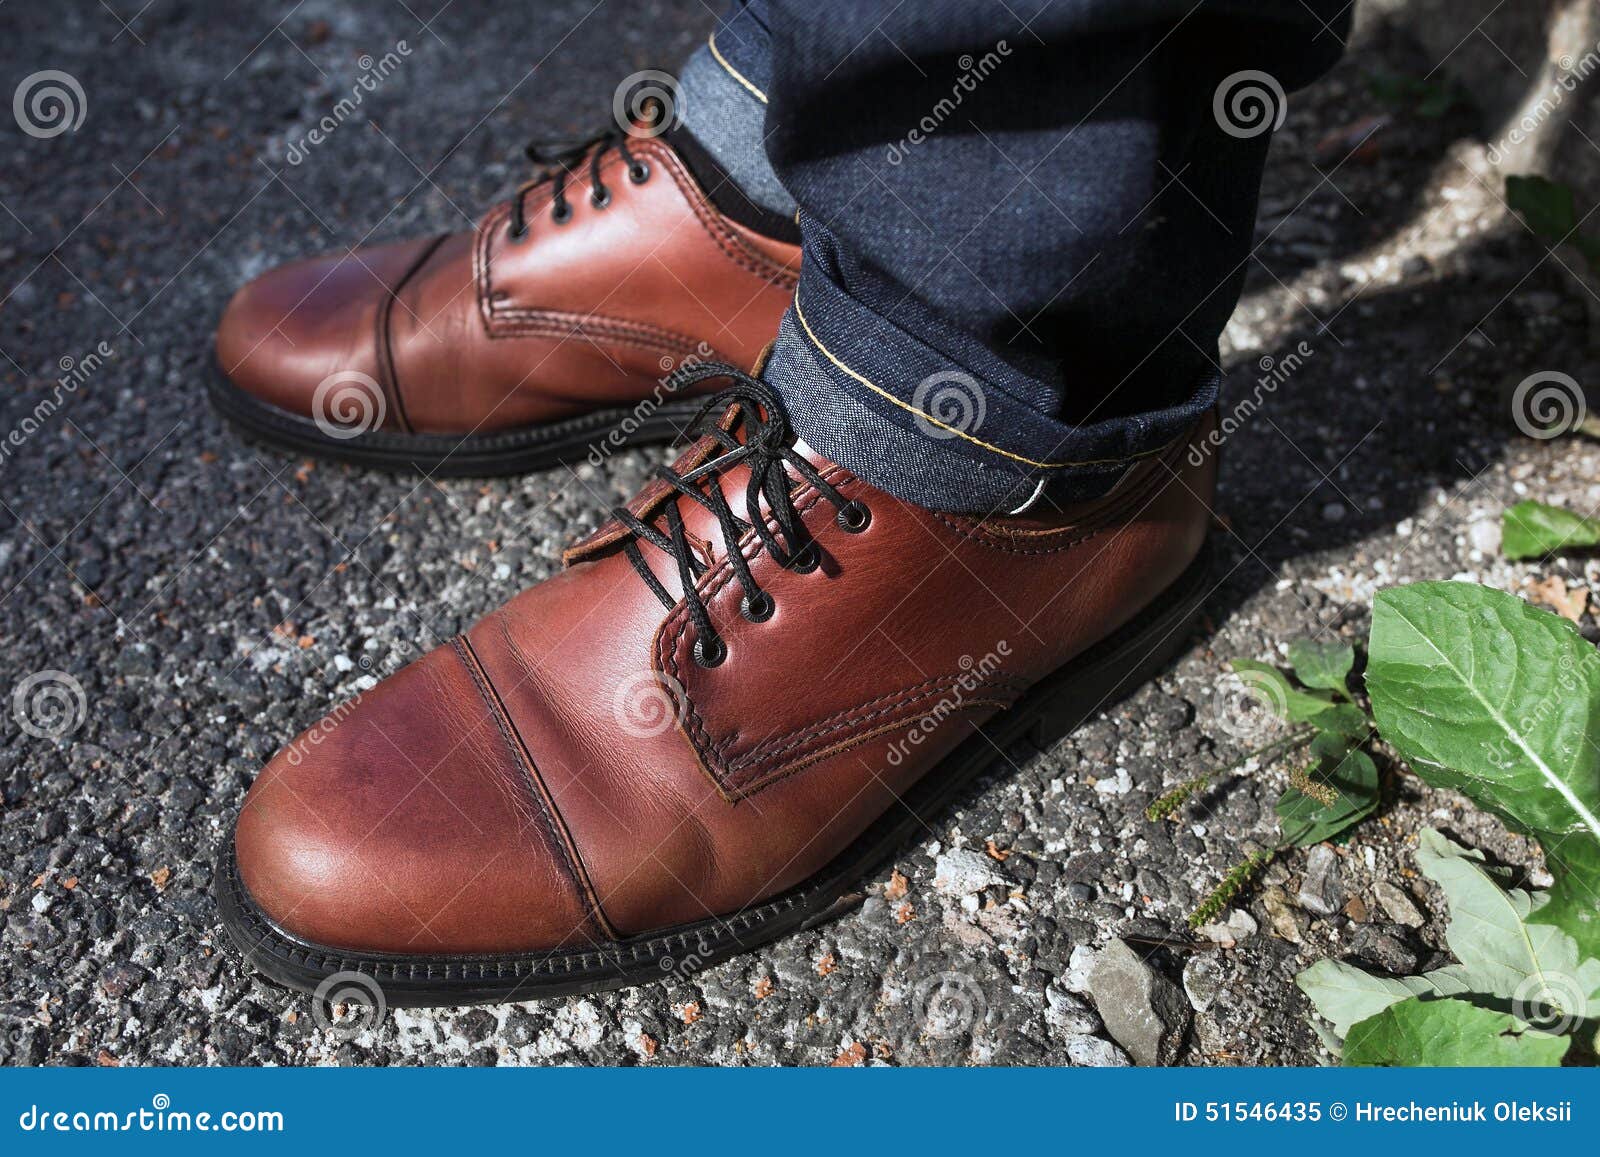 Men s feet in retro shoes stock image. Image of build - 51546435